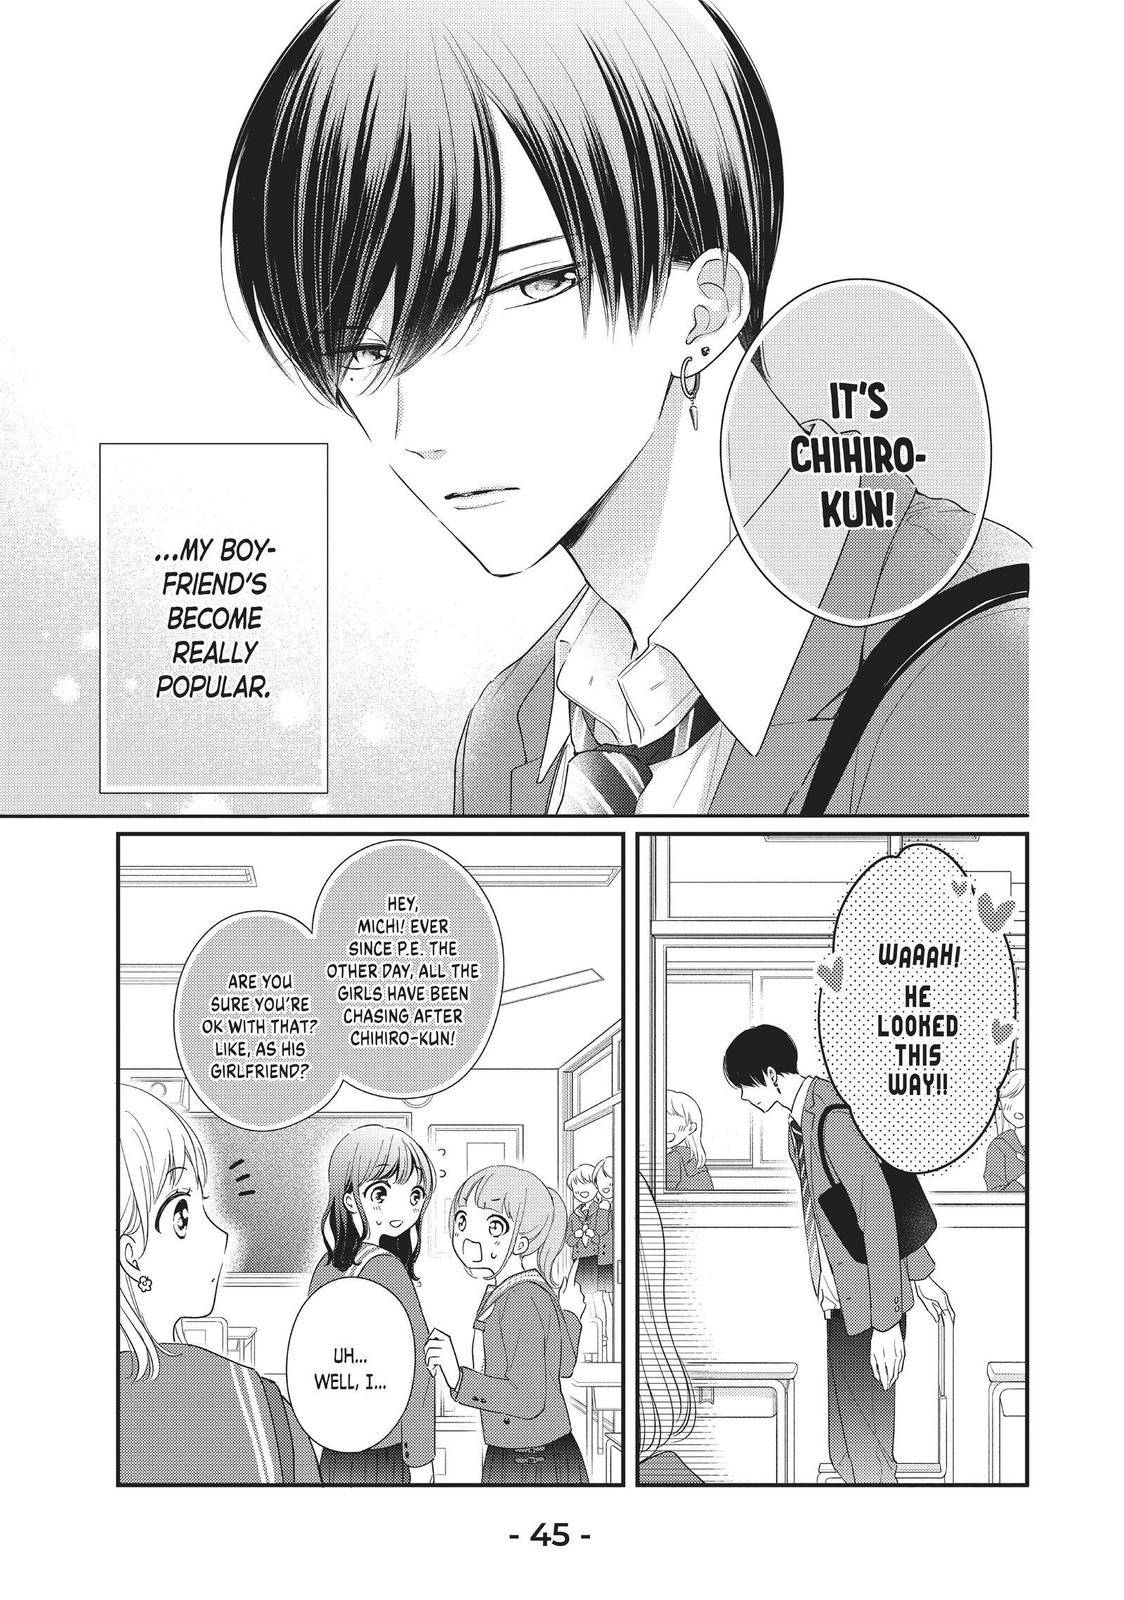 Chihiro-kun Only Has Eyes for Me - chapter 26 - #3